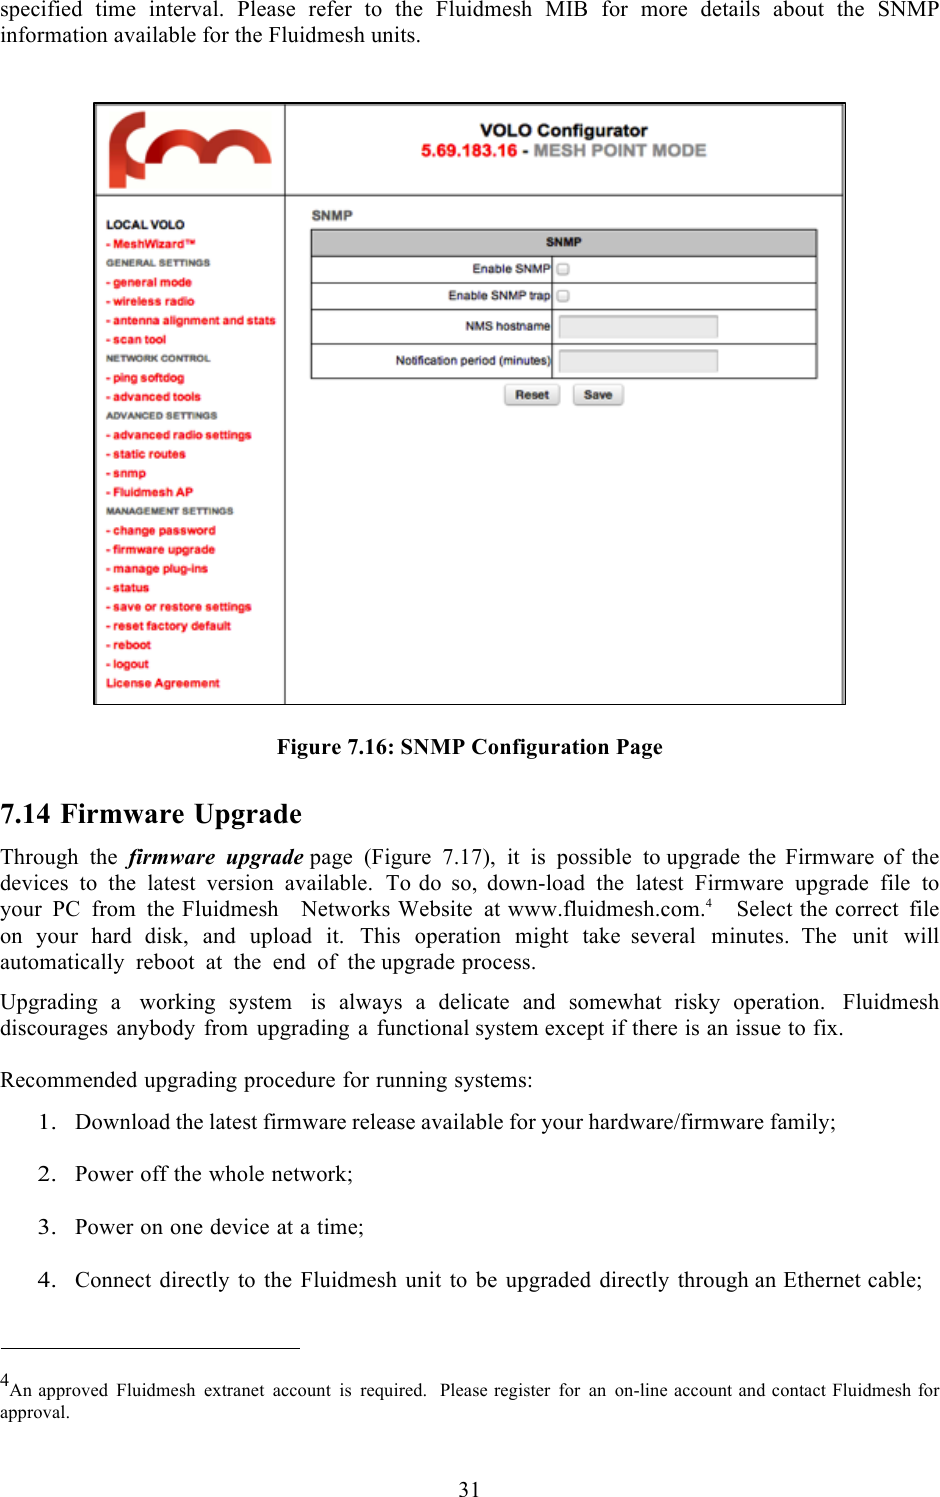  31  specified  time  interval.  Please  refer  to  the  Fluidmesh  MIB  for  more  details  about  the  SNMP information available for the Fluidmesh units.     Figure 7.16: SNMP Configuration Page 7.14 Firmware Upgrade Through the firmware upgrade page  (Figure 7.17), it is possible to upgrade the Firmware of the devices to the latest version available. To do so, down-load the latest Firmware upgrade file to your PC from the Fluidmesh   Networks Website at www.fluidmesh.com.4   Select the correct file on your hard disk, and upload it. This operation might take several minutes. The unit will automatically reboot at the end of the upgrade process.  Upgrading  a working  system is  always  a  delicate  and somewhat  risky  operation. Fluidmesh discourages anybody from upgrading a  functional system except if there is an issue to fix.  Recommended upgrading procedure for running systems:  1. Download the latest firmware release available for your hardware/firmware family;  2. Power off the whole network;  3. Power on one device at a time;  4. Connect directly to the Fluidmesh unit to be upgraded directly through an Ethernet cable;    4An approved Fluidmesh extranet account is required.  Please register for an on-line account and contact Fluidmesh for approval.  